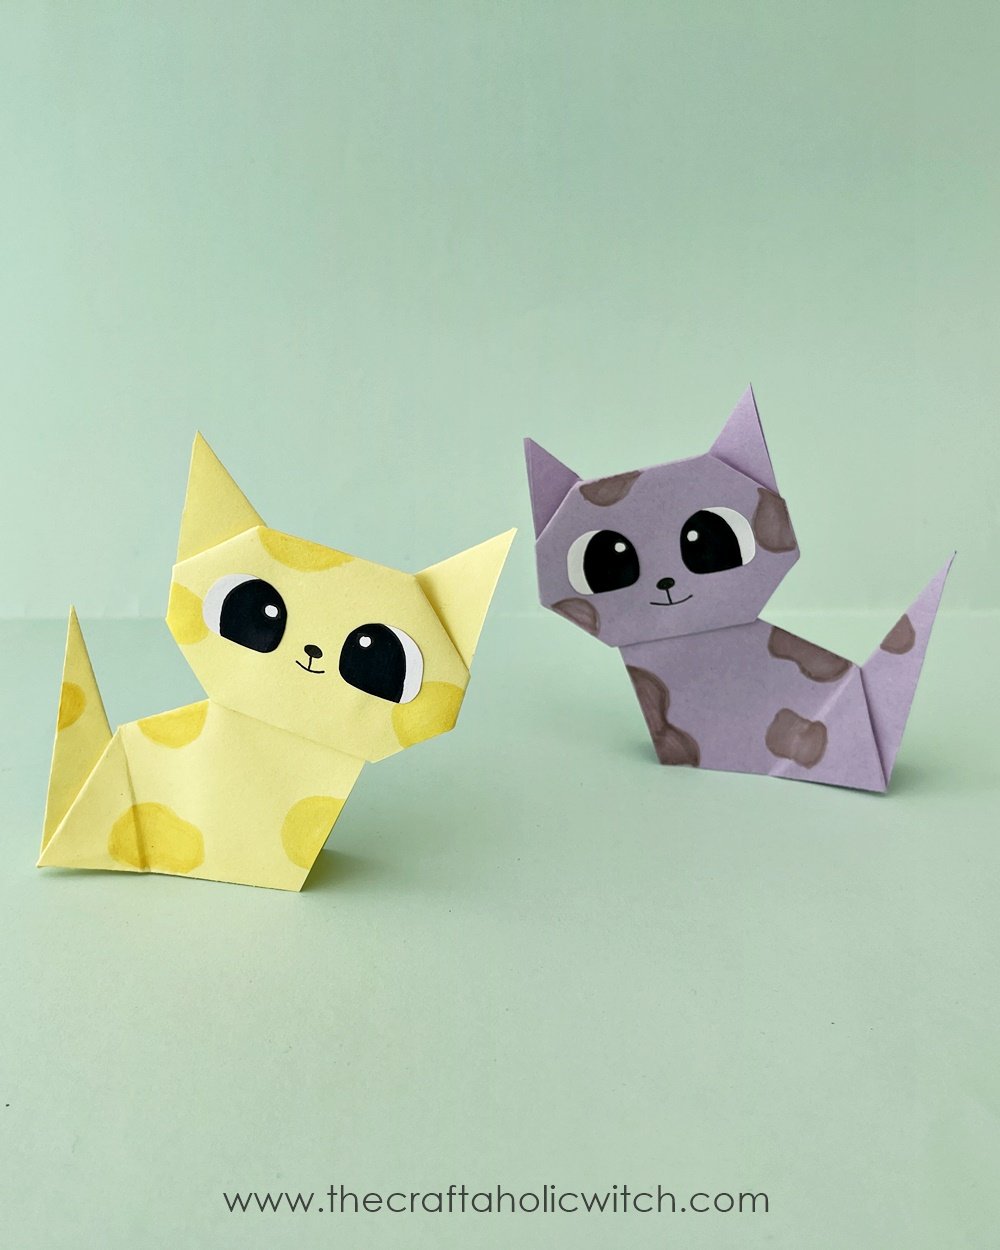 The double-sheet origami cat